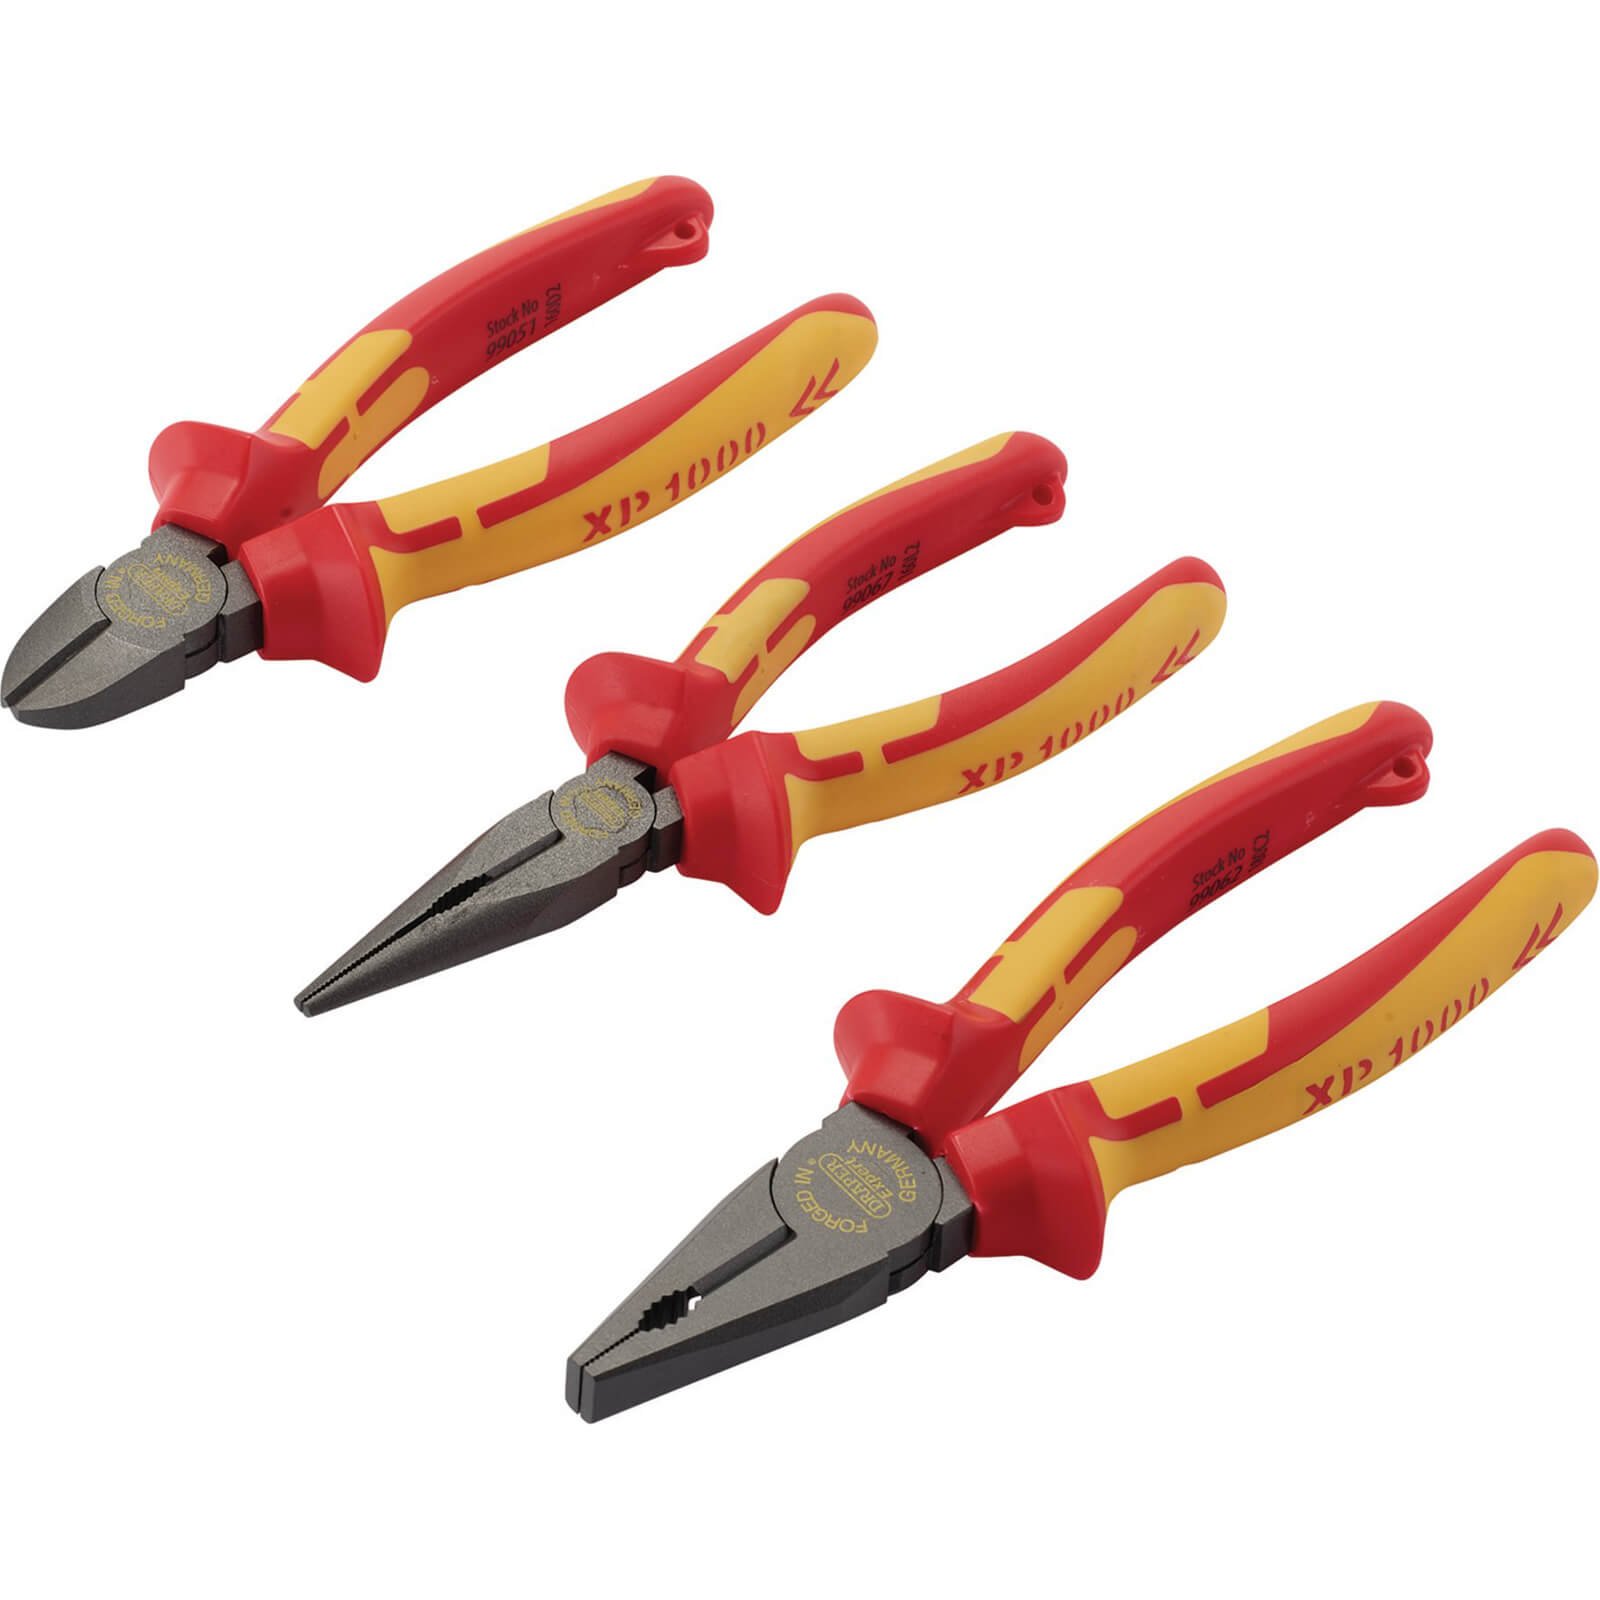 Photo of Draper 3 Piece Xp1000 Vde Insulated Tethered Pliers Set